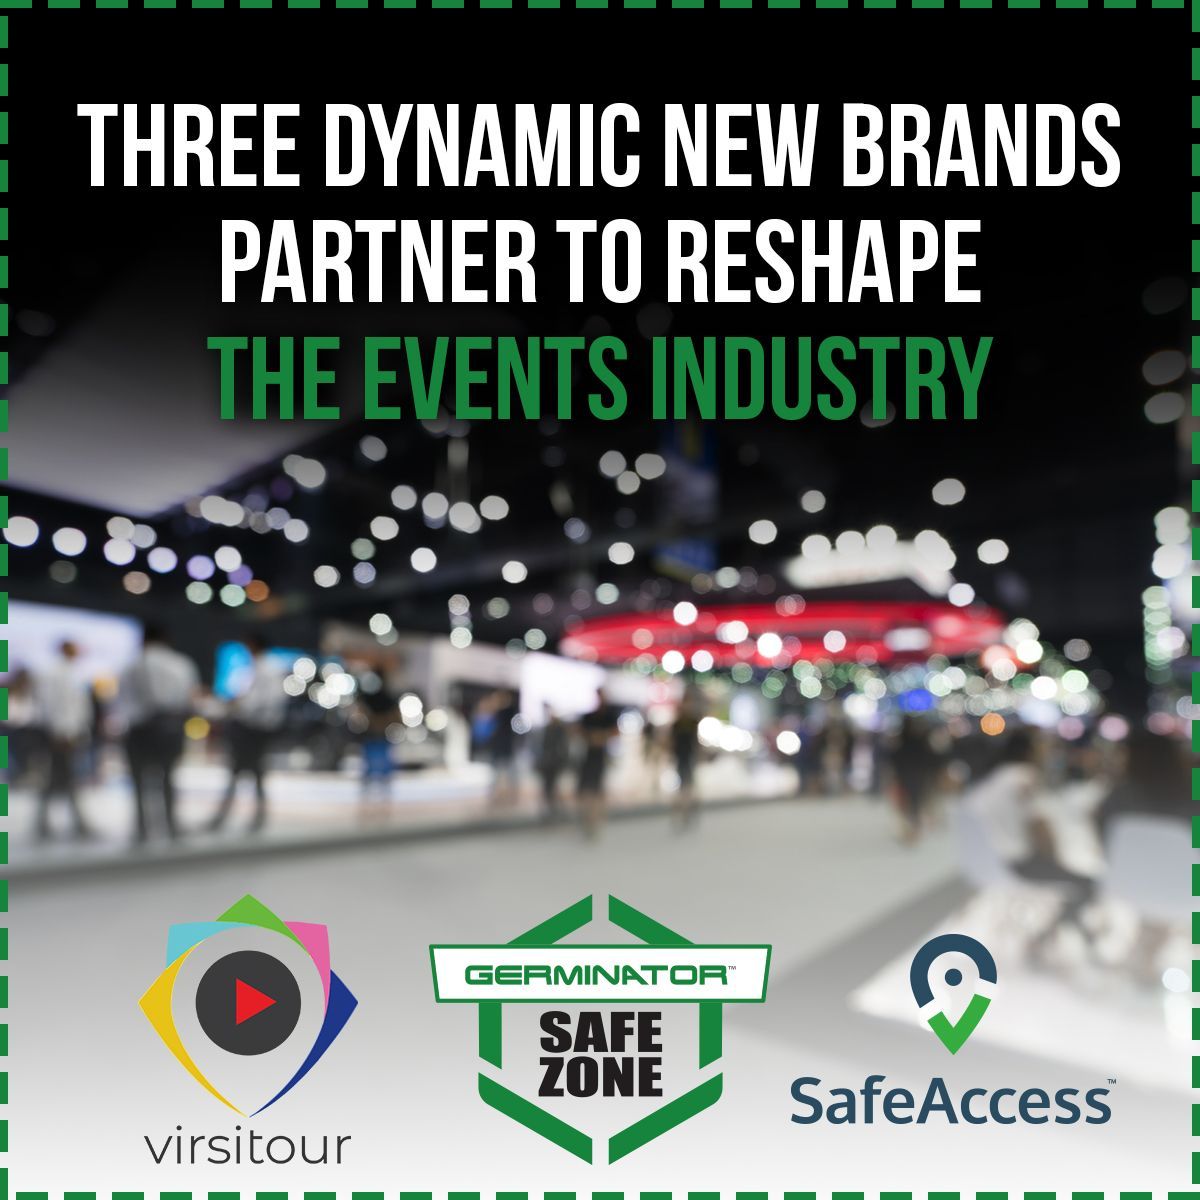 THREE DYNAMIC NEW BRANDS PARTNER TO RESHAPE THE EVENTS INDUSTRY